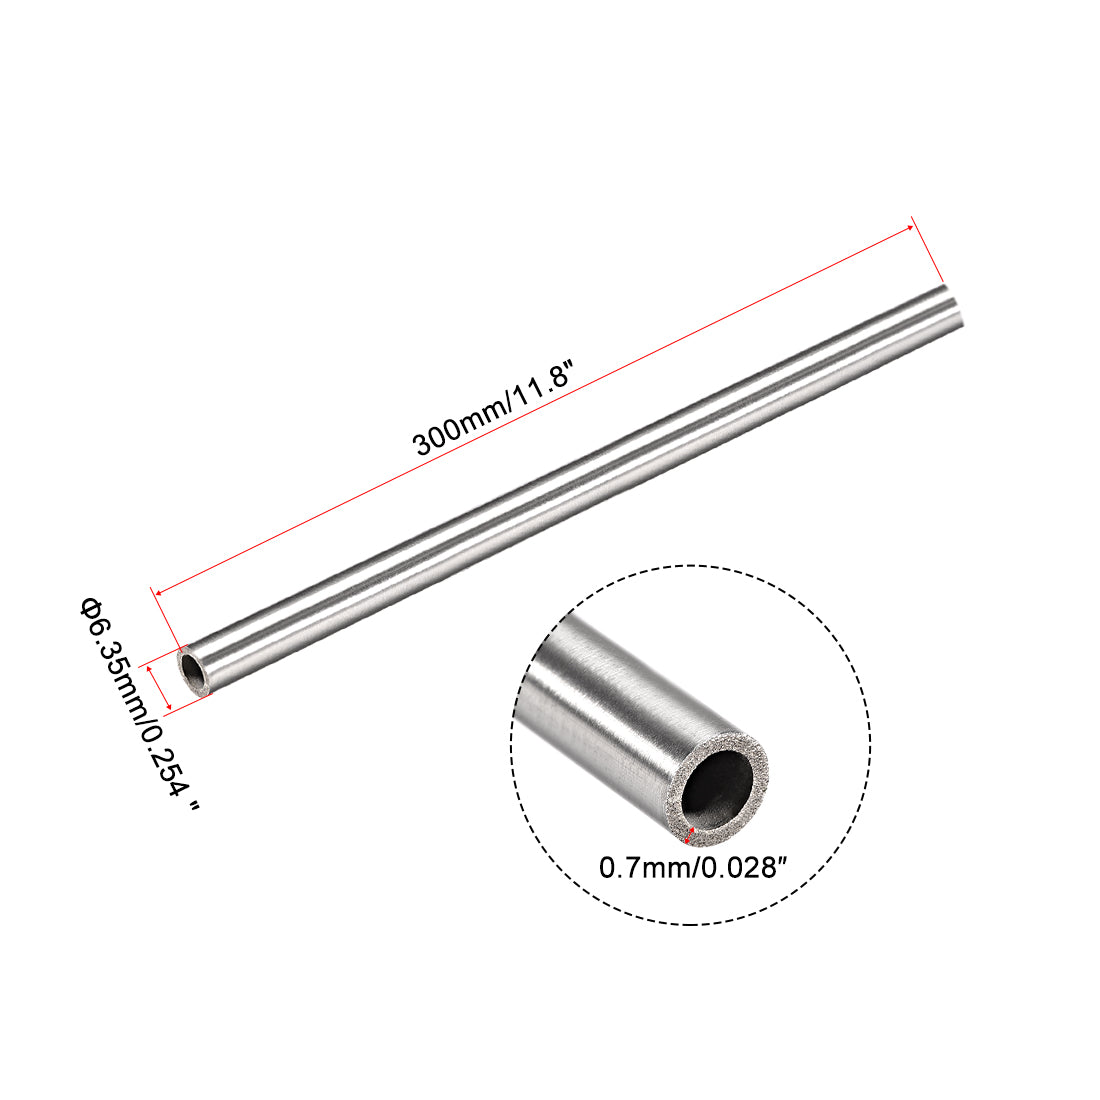 uxcell Uxcell 4Pcs Stainless Steel Capillary Tube 4.95mm ID 6.35mm OD 300mm Long 0.7mm Wall